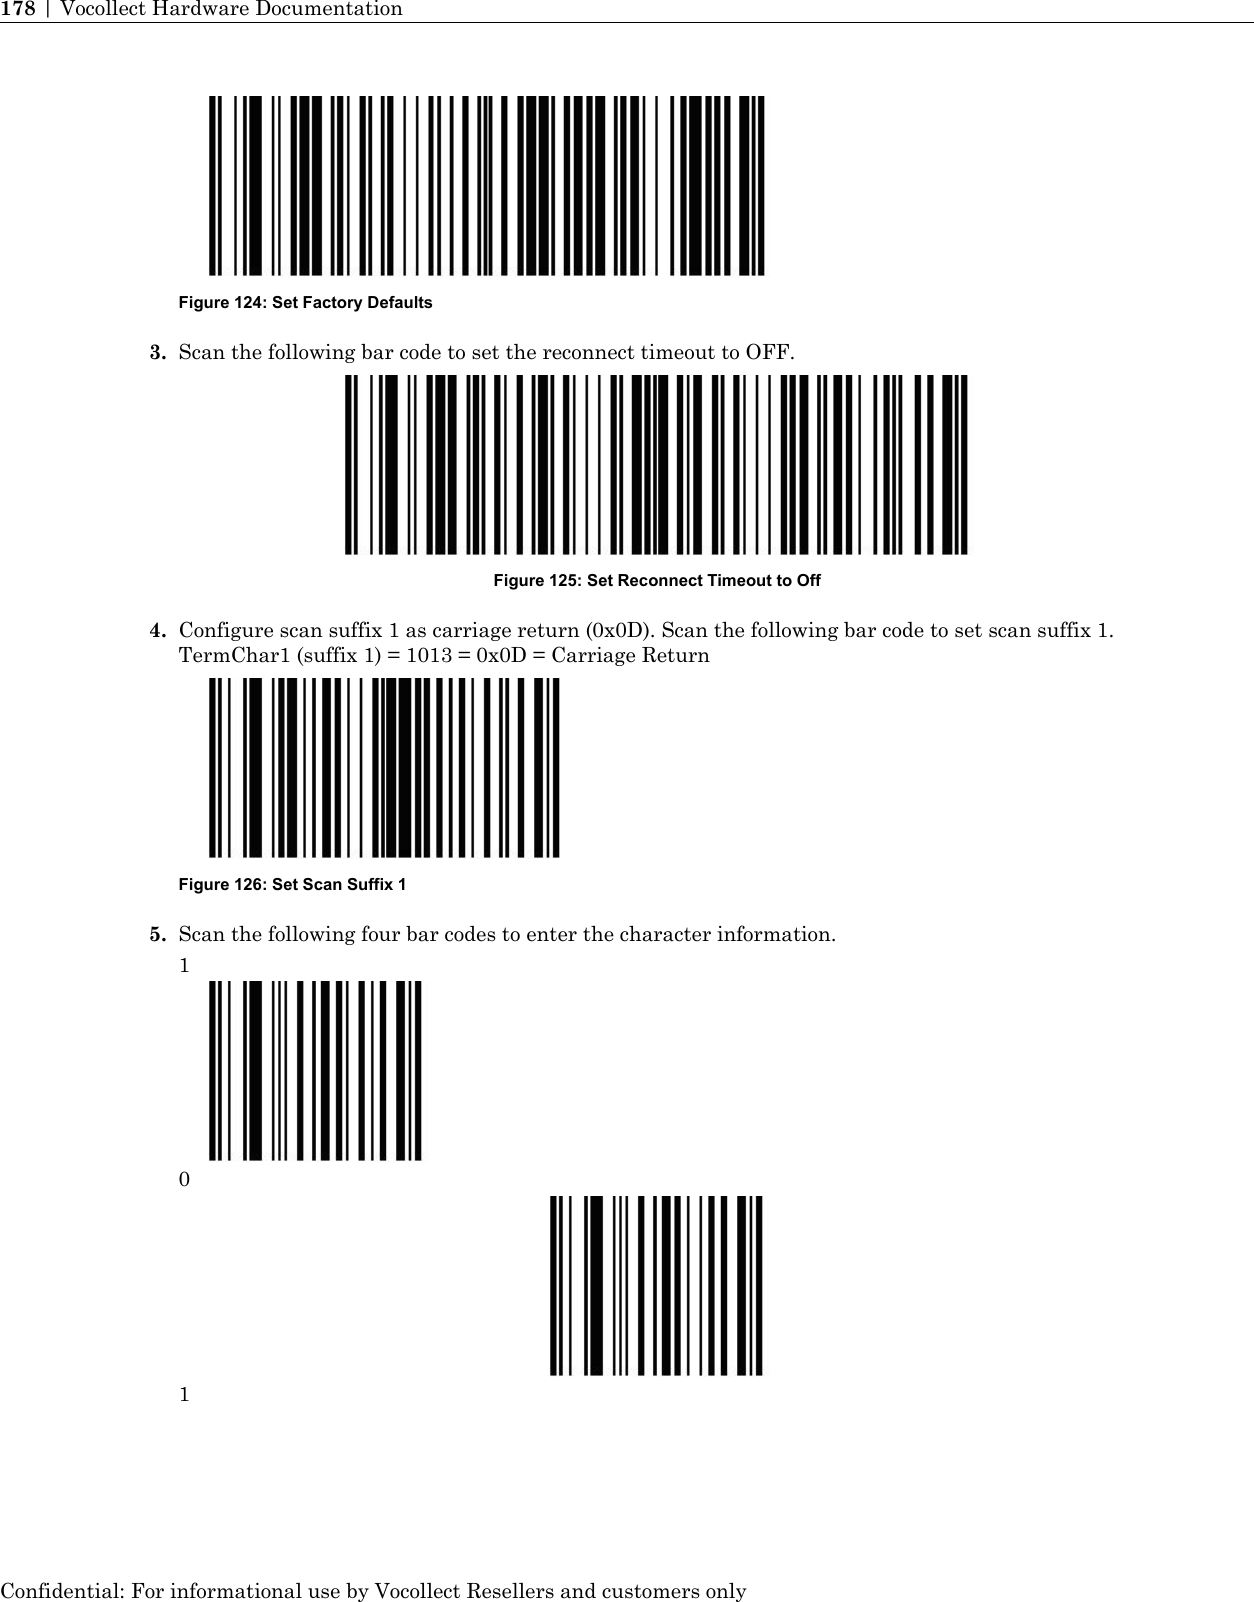 Figure 124: Set Factory Defaults3. Scan the following bar code to set the reconnect timeout to OFF.Figure 125: Set Reconnect Timeout to Off4. Configure scan suffix 1 as carriage return (0x0D). Scan the following bar code to set scan suffix 1.TermChar1 (suffix 1) = 1013 = 0x0D = Carriage ReturnFigure 126: Set Scan Suffix 15. Scan the following four bar codes to enter the character information.101Confidential: For informational use by Vocollect Resellers and customers only178 | Vocollect Hardware Documentation